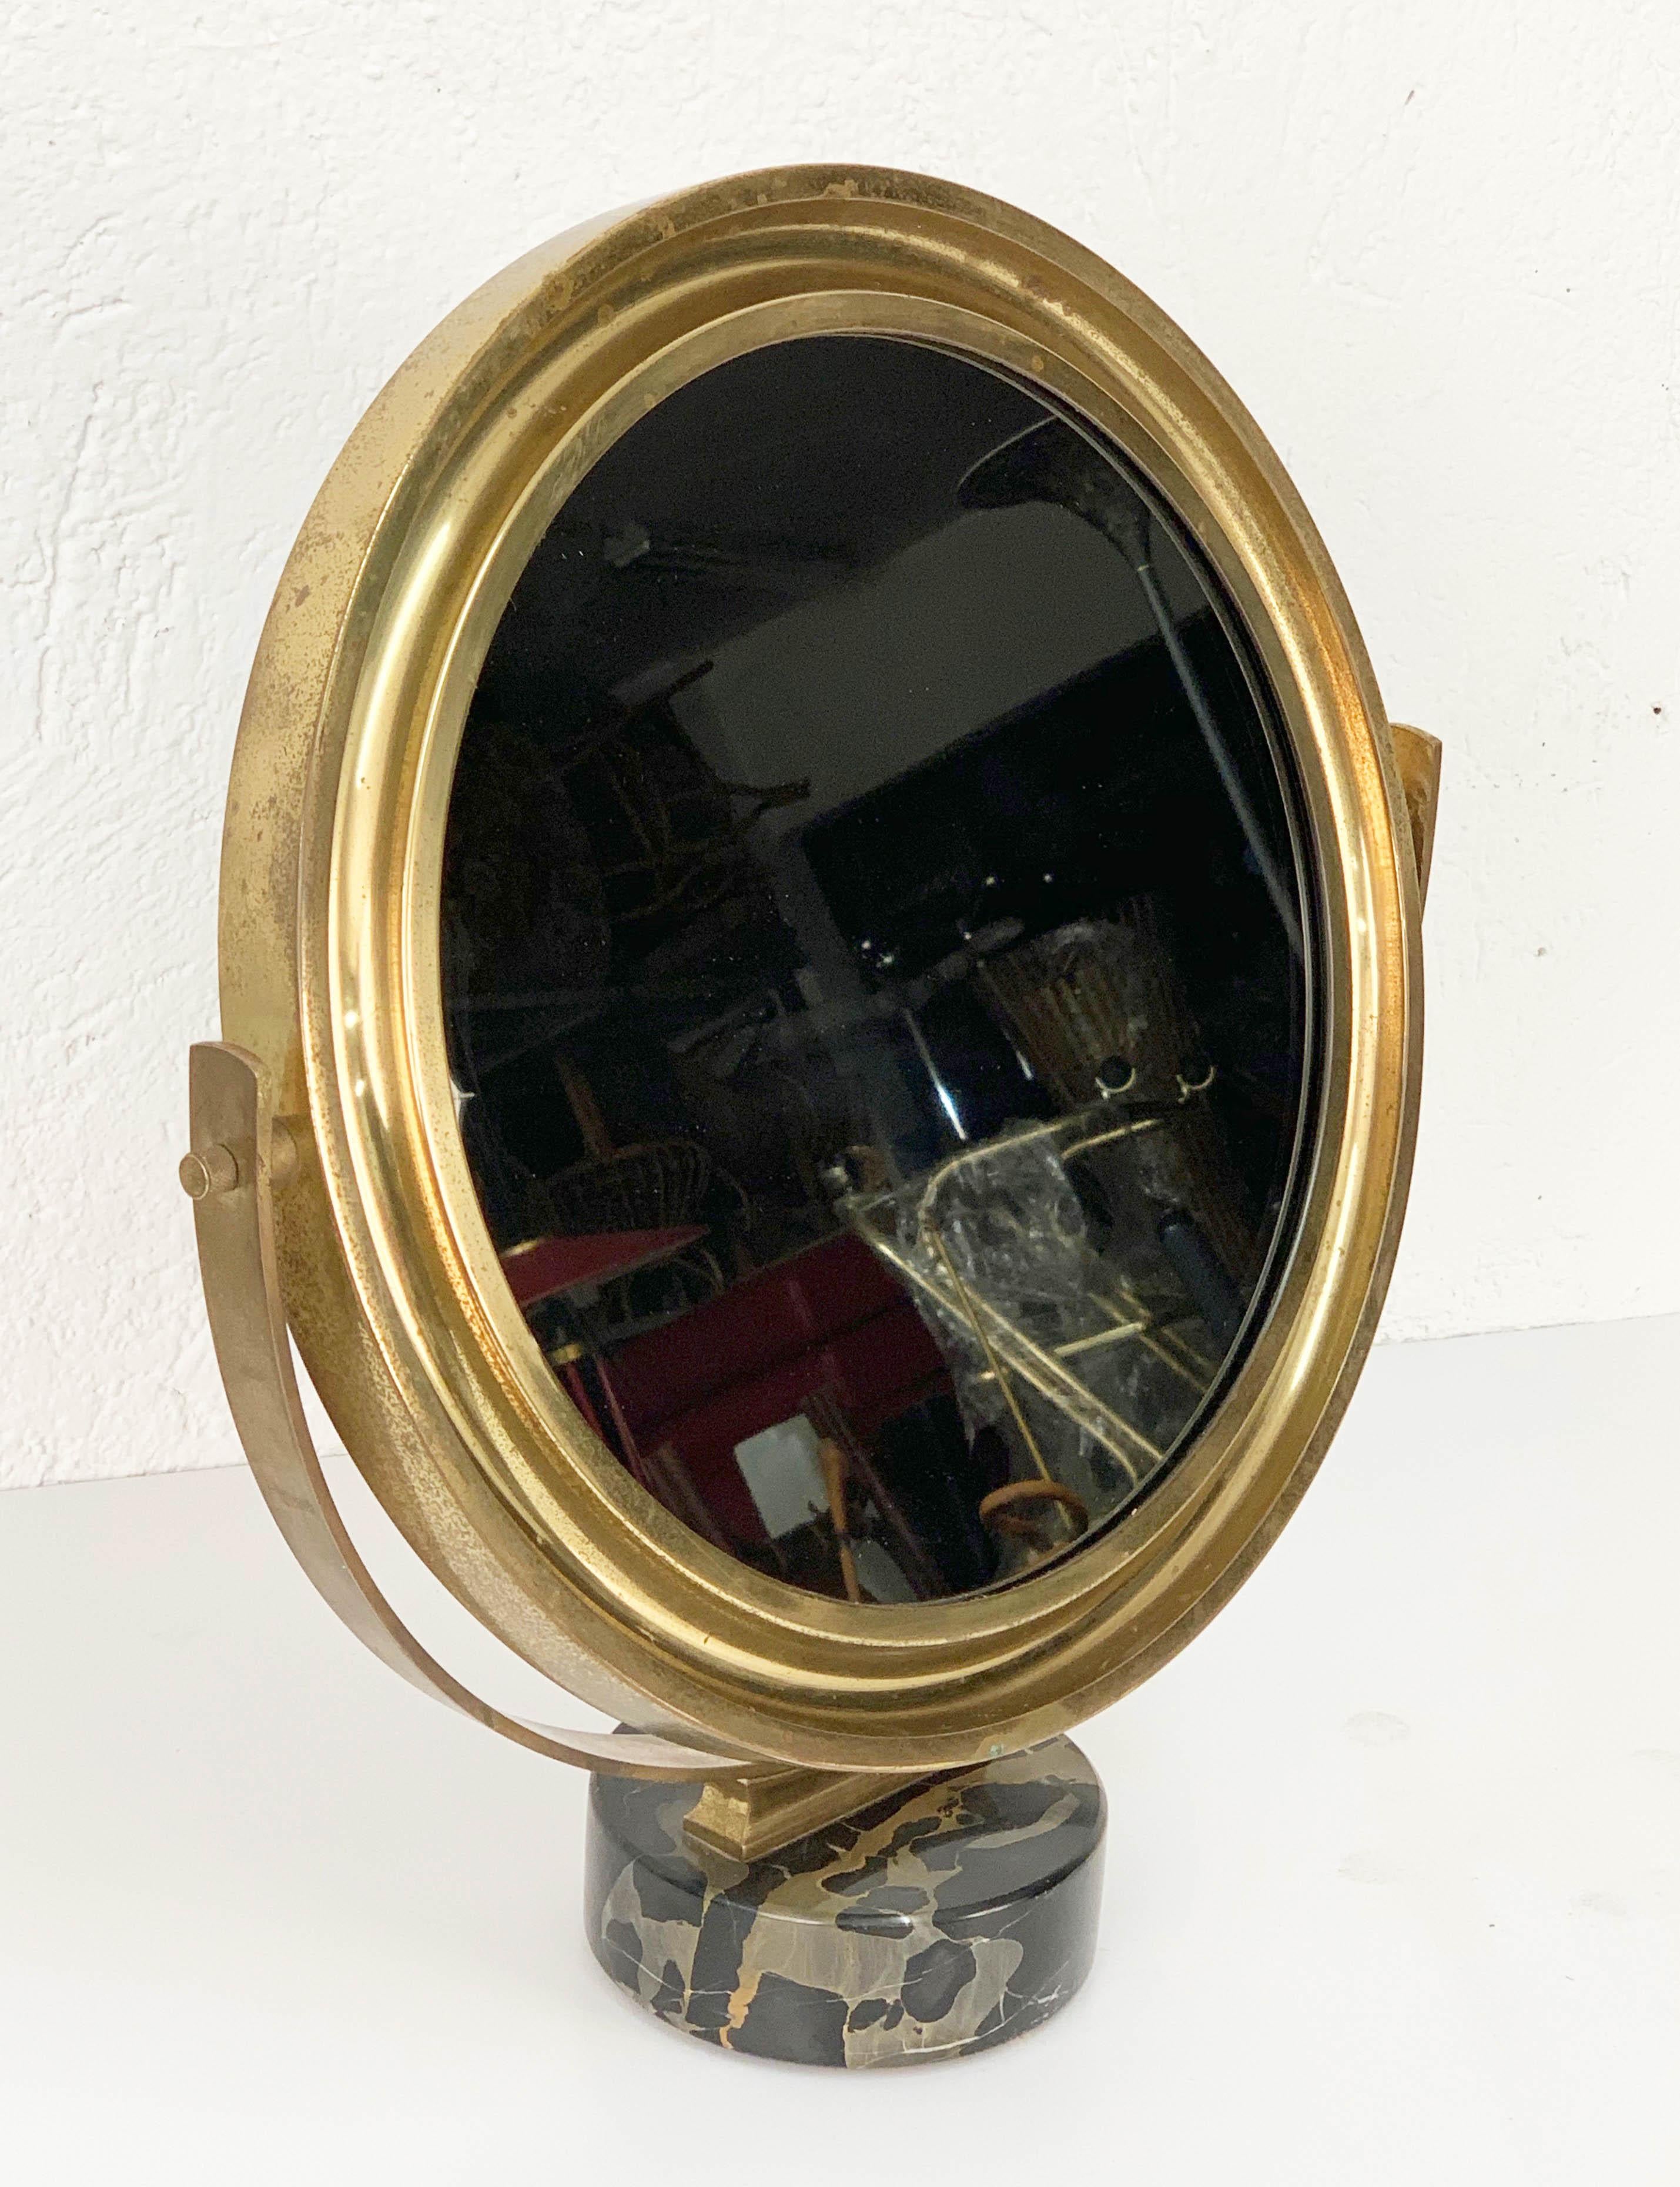 Midcentury brass table mirror with a black marble base. This fantastic item was designed by Sergio Mazza for Artemide, and it was made in Italy during the 1960s.

This surprising piece is composed of a rotating mirror in brass and a marble base.